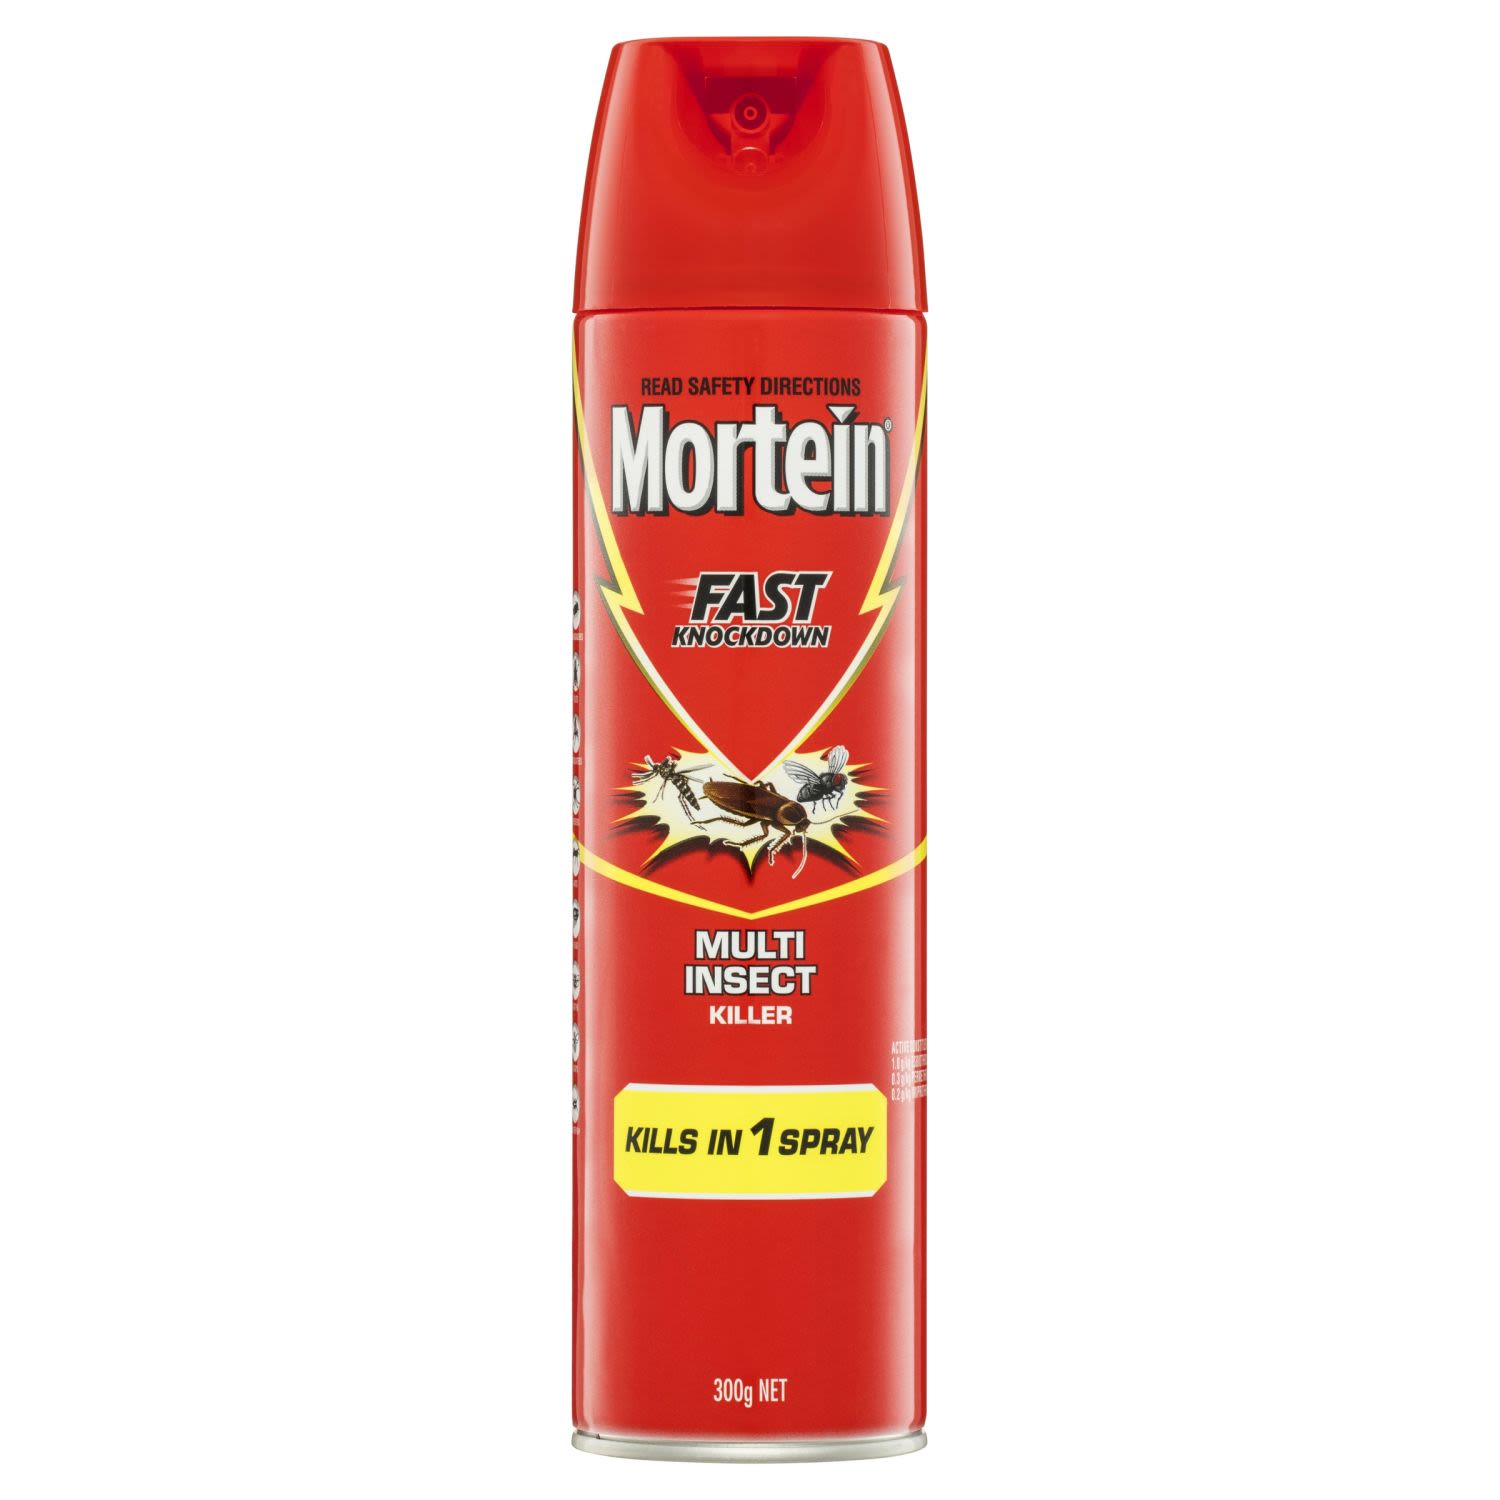 Mortein Fast Knockdown Insect Spray Multi Insect Killer, 300 Gram